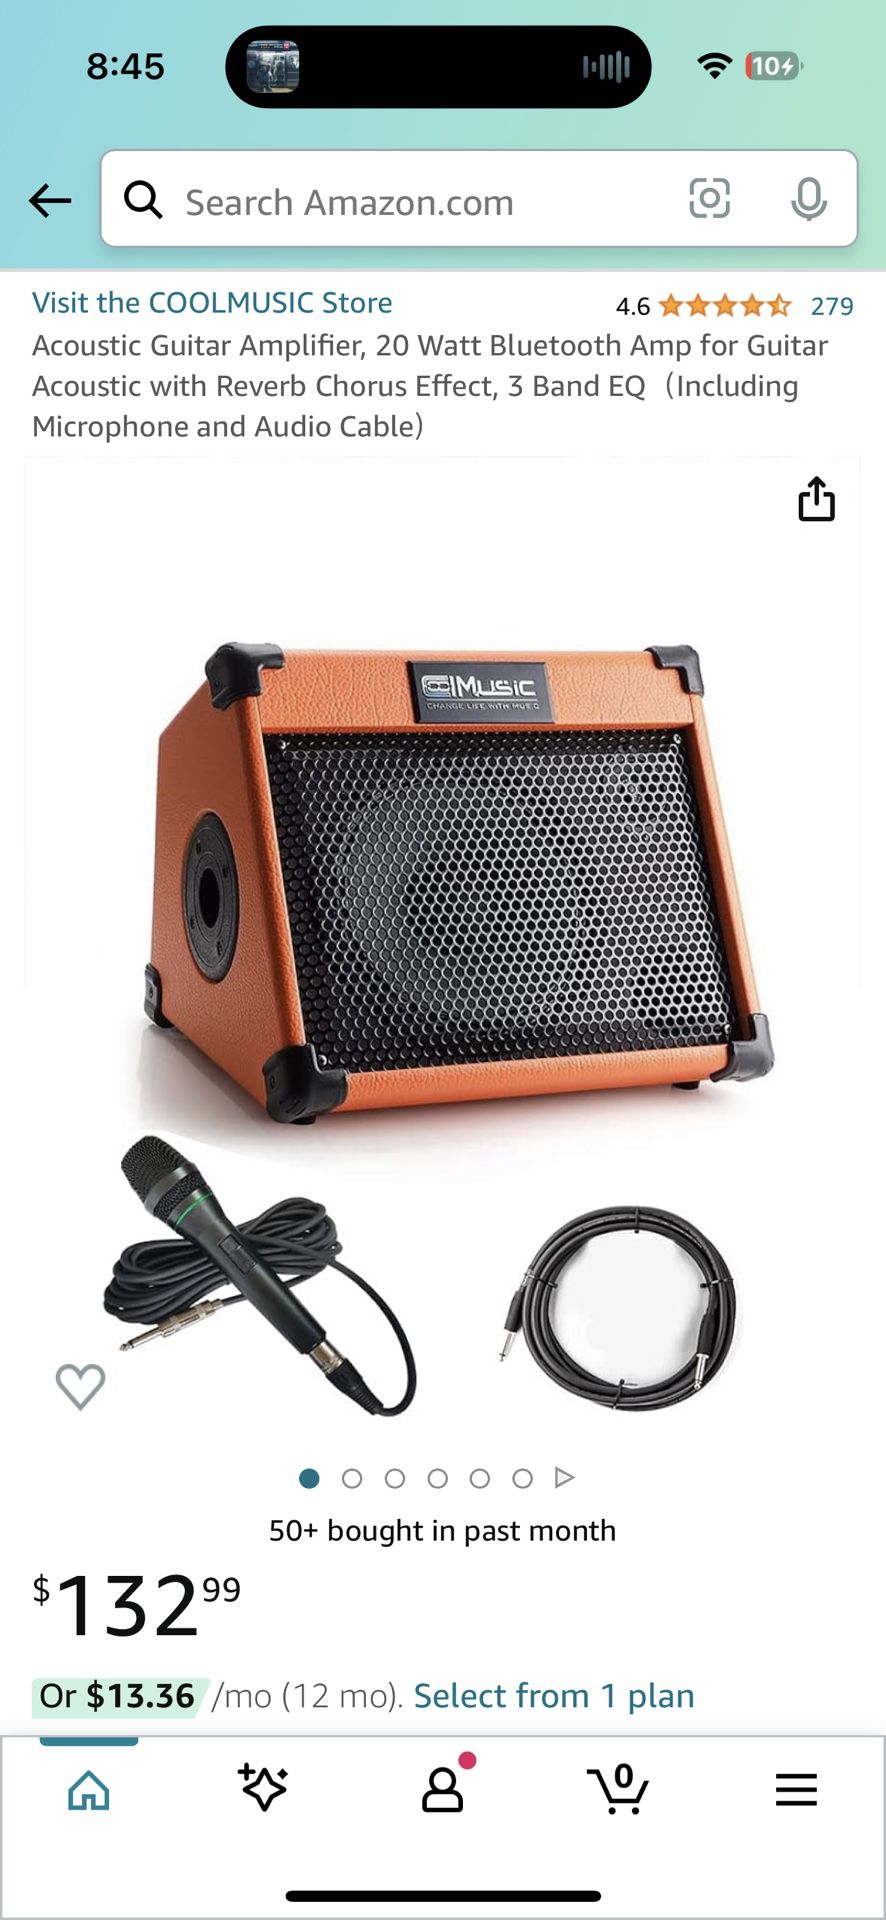 Acoustic Guitar Amplifier, 20 Watt Bluetooth Amp for Guitar Acoustic with Reverb Chorus Effect, 3 Band EQ